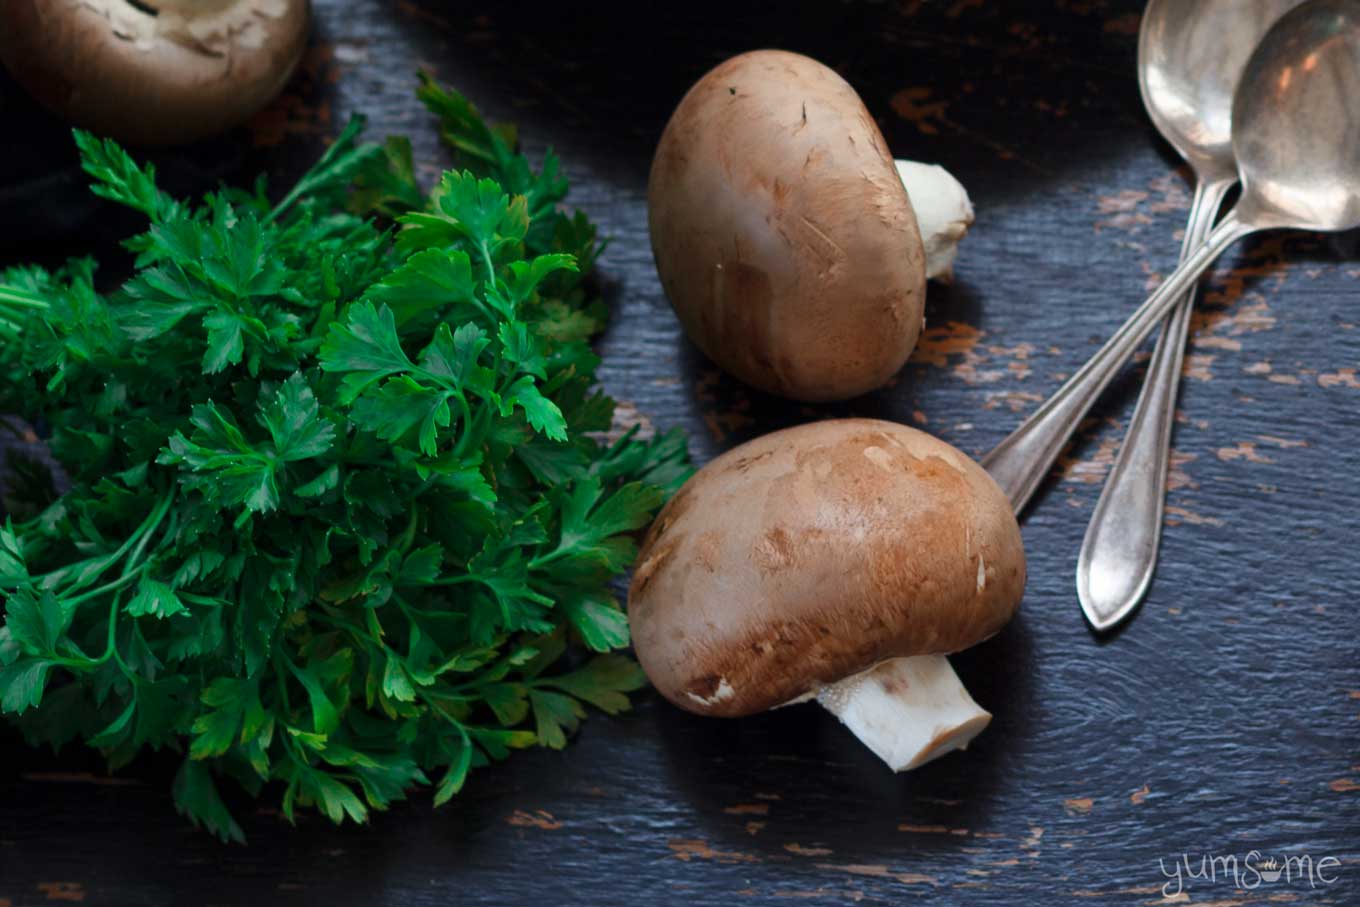 mushrooms and parsley on a table | yumsome.com